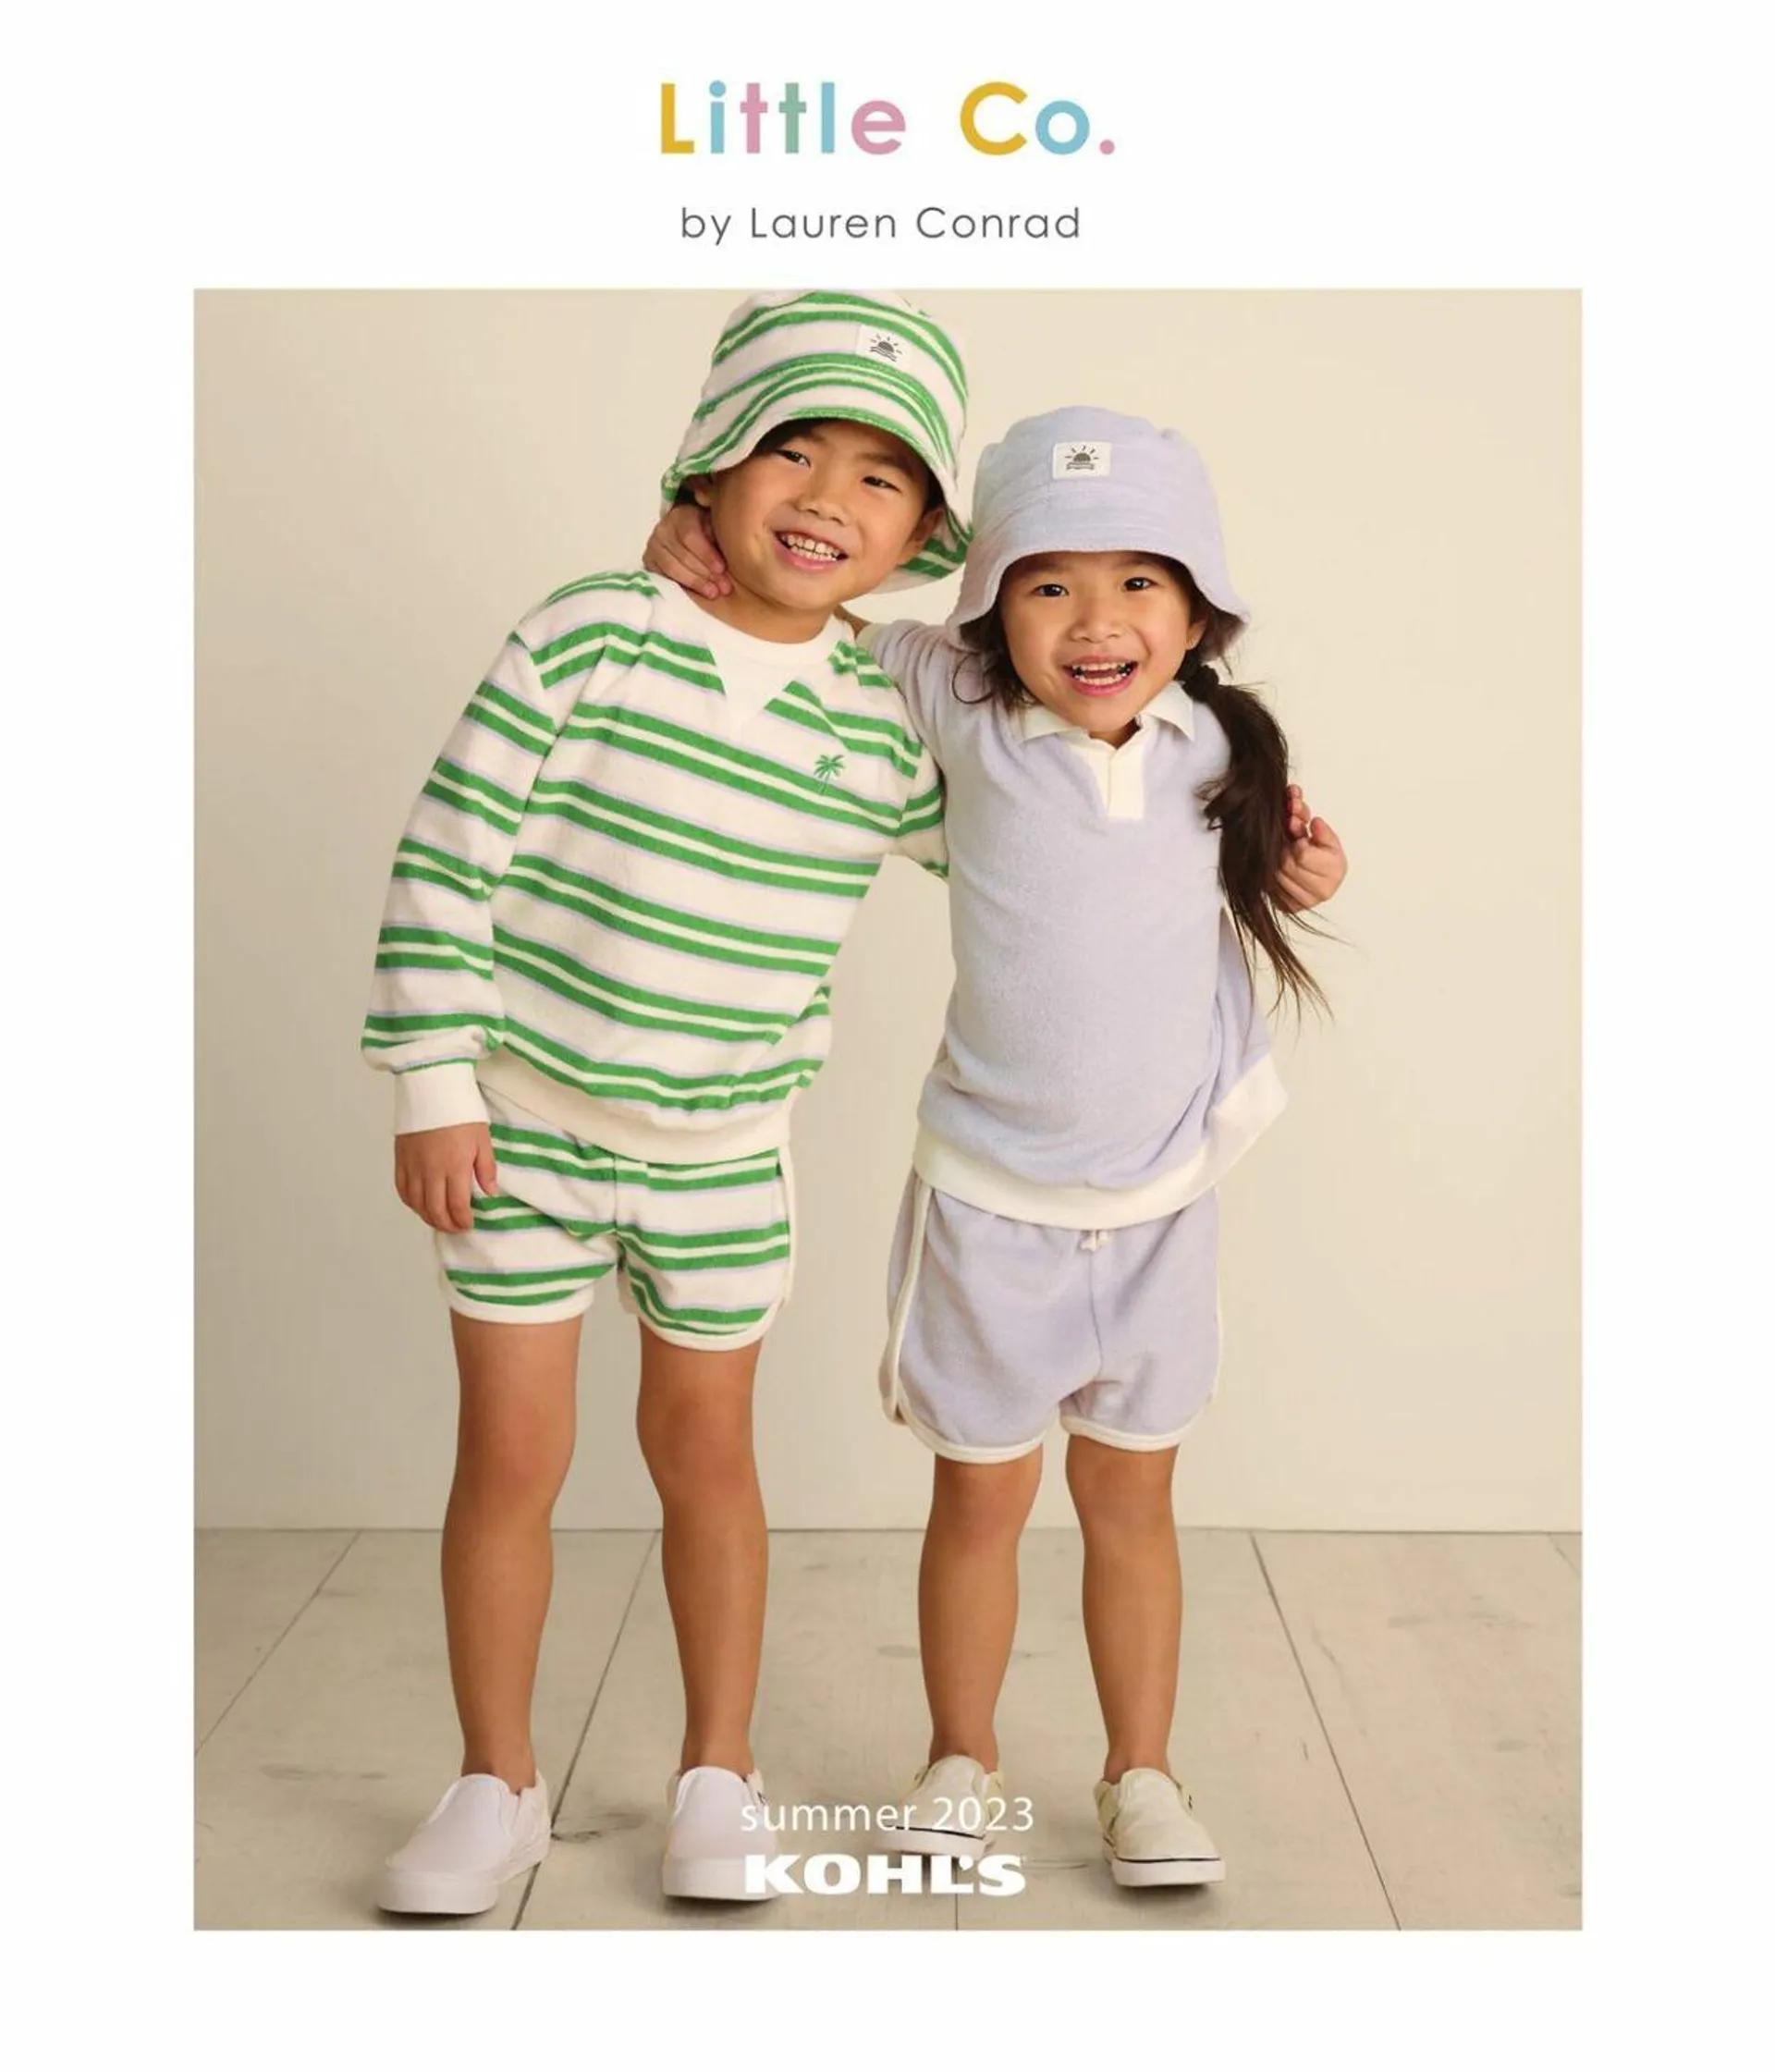 Kohls Current weekly ad - 1